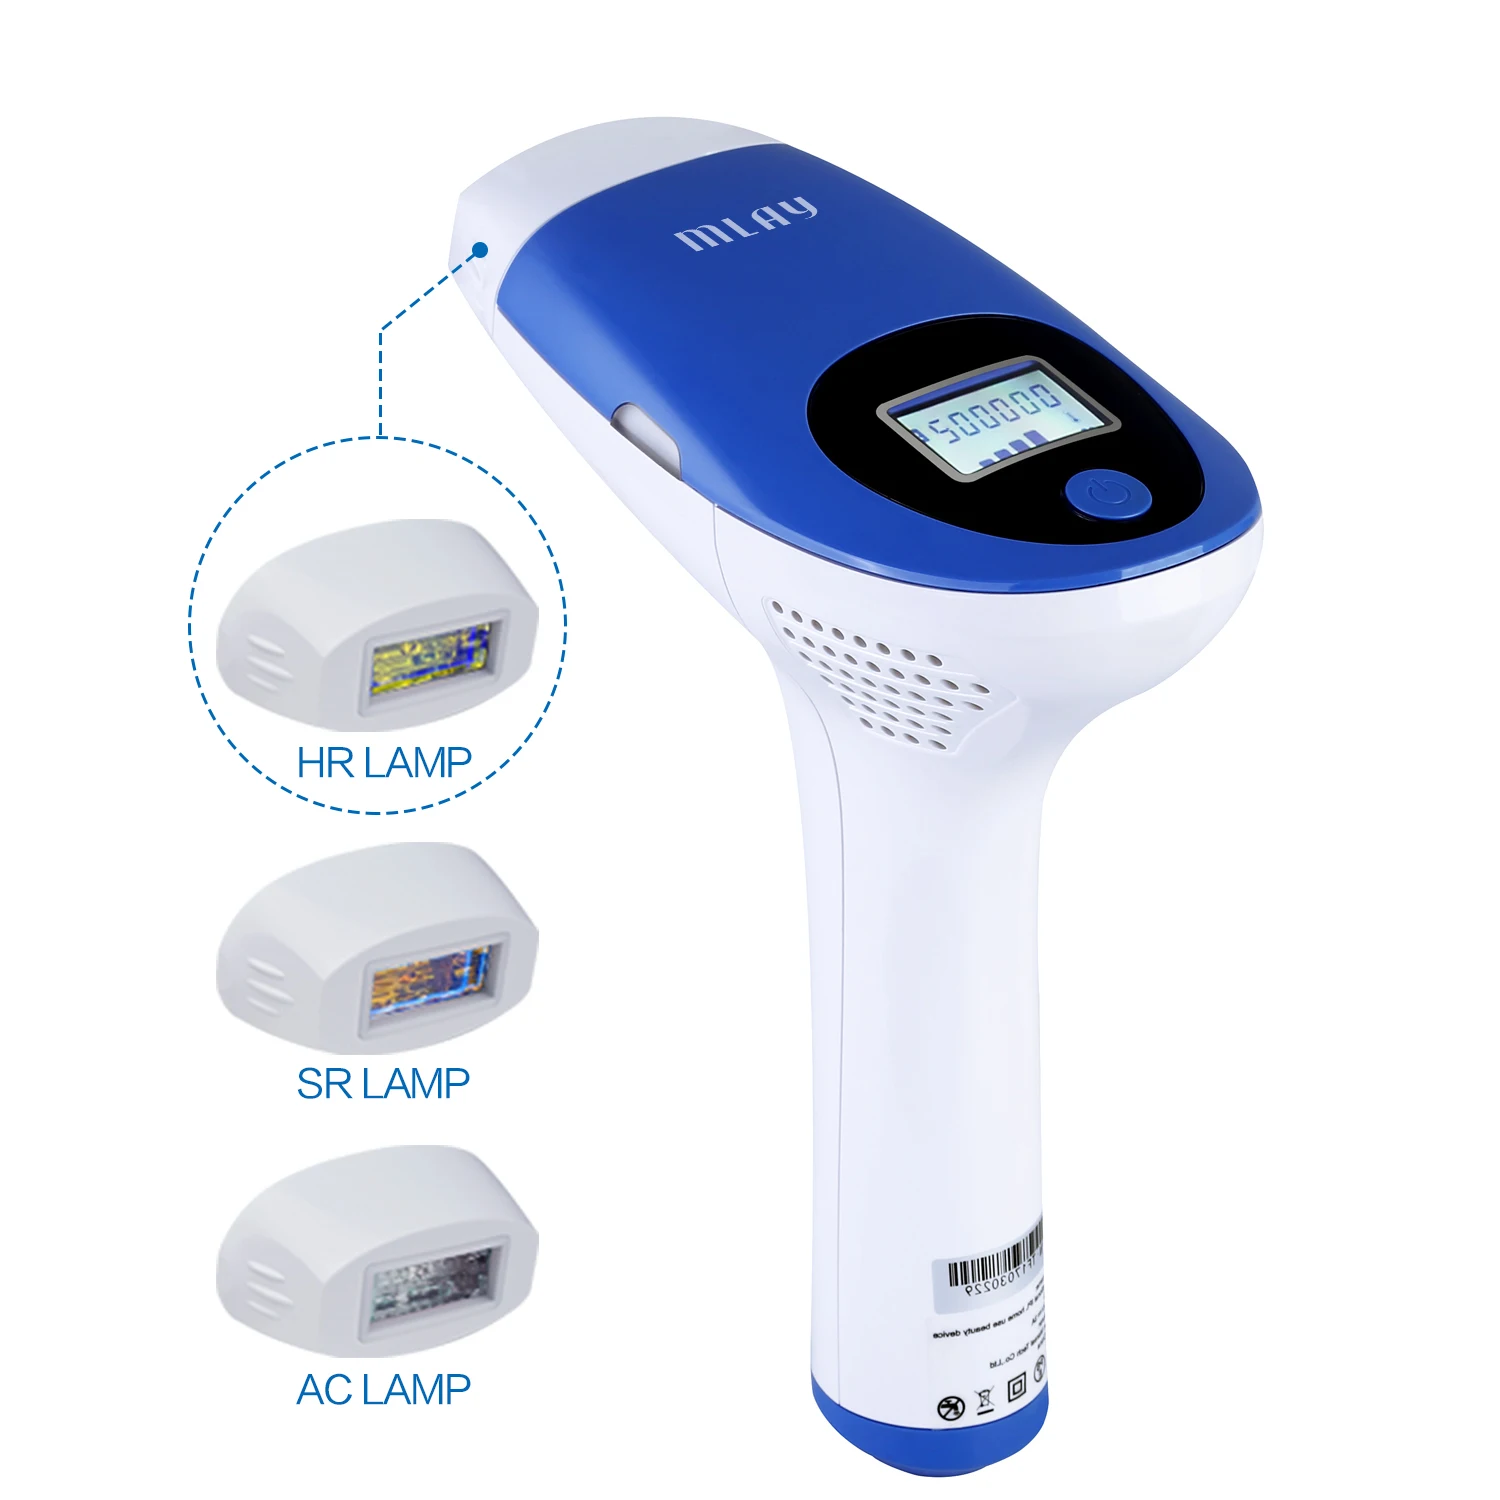 MLAY OEM Portable IPL Laser Hair Removal Device for Home Use with 3 Functions Lamp for 500000 Shots Body Bikini Rejuvenation